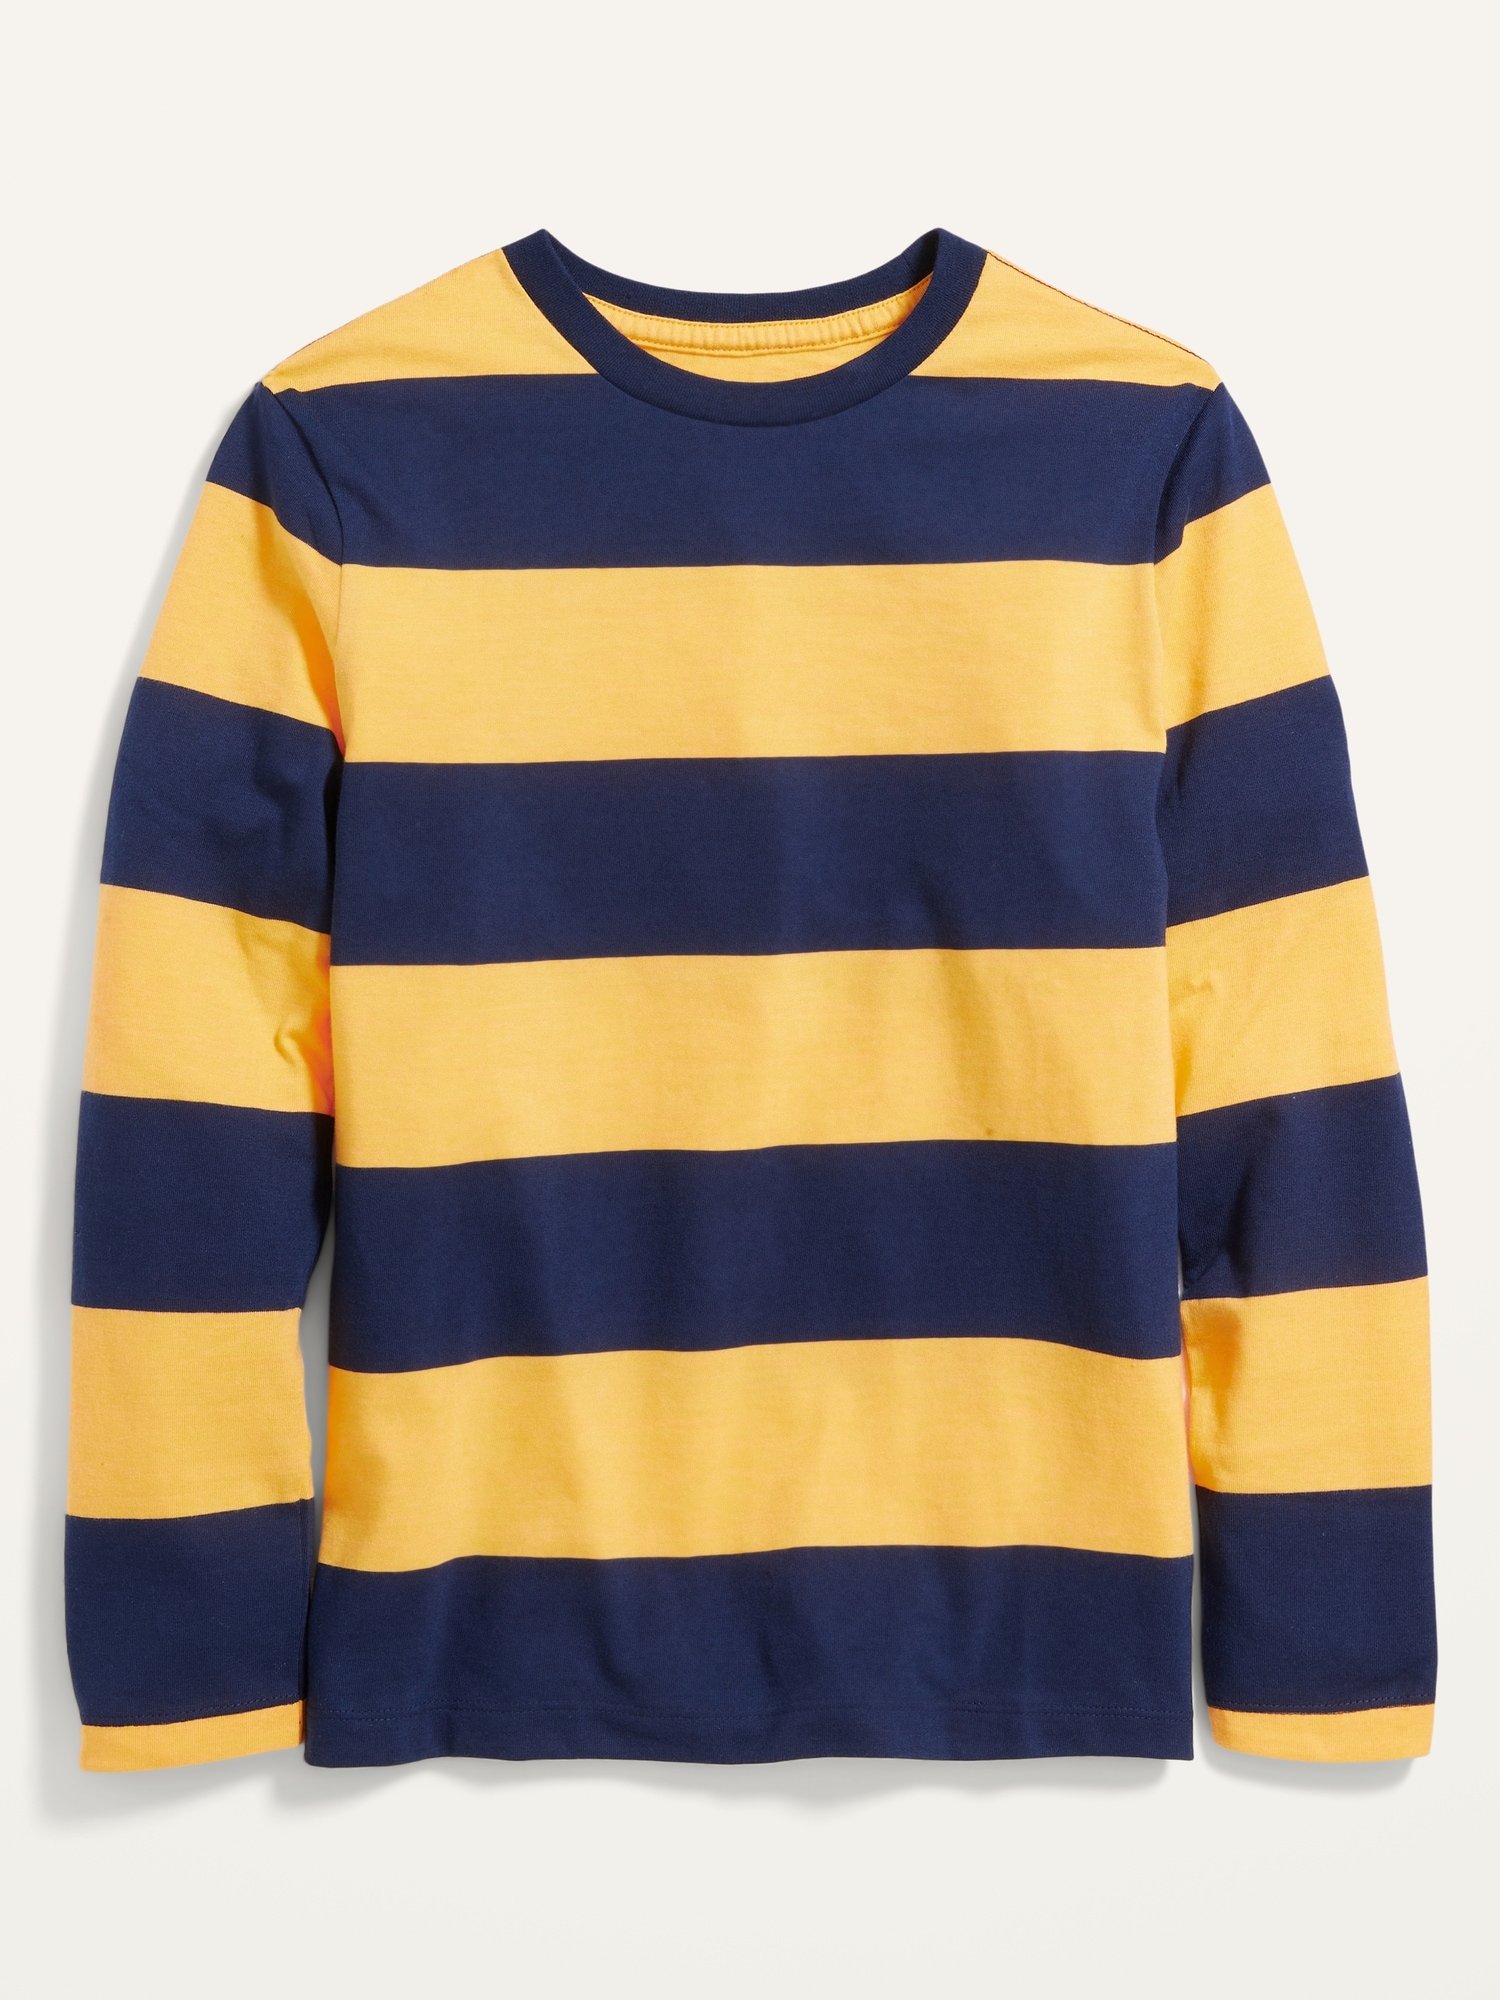 softest-striped-long-sleeve-t-shirt-for-boys-old-navy